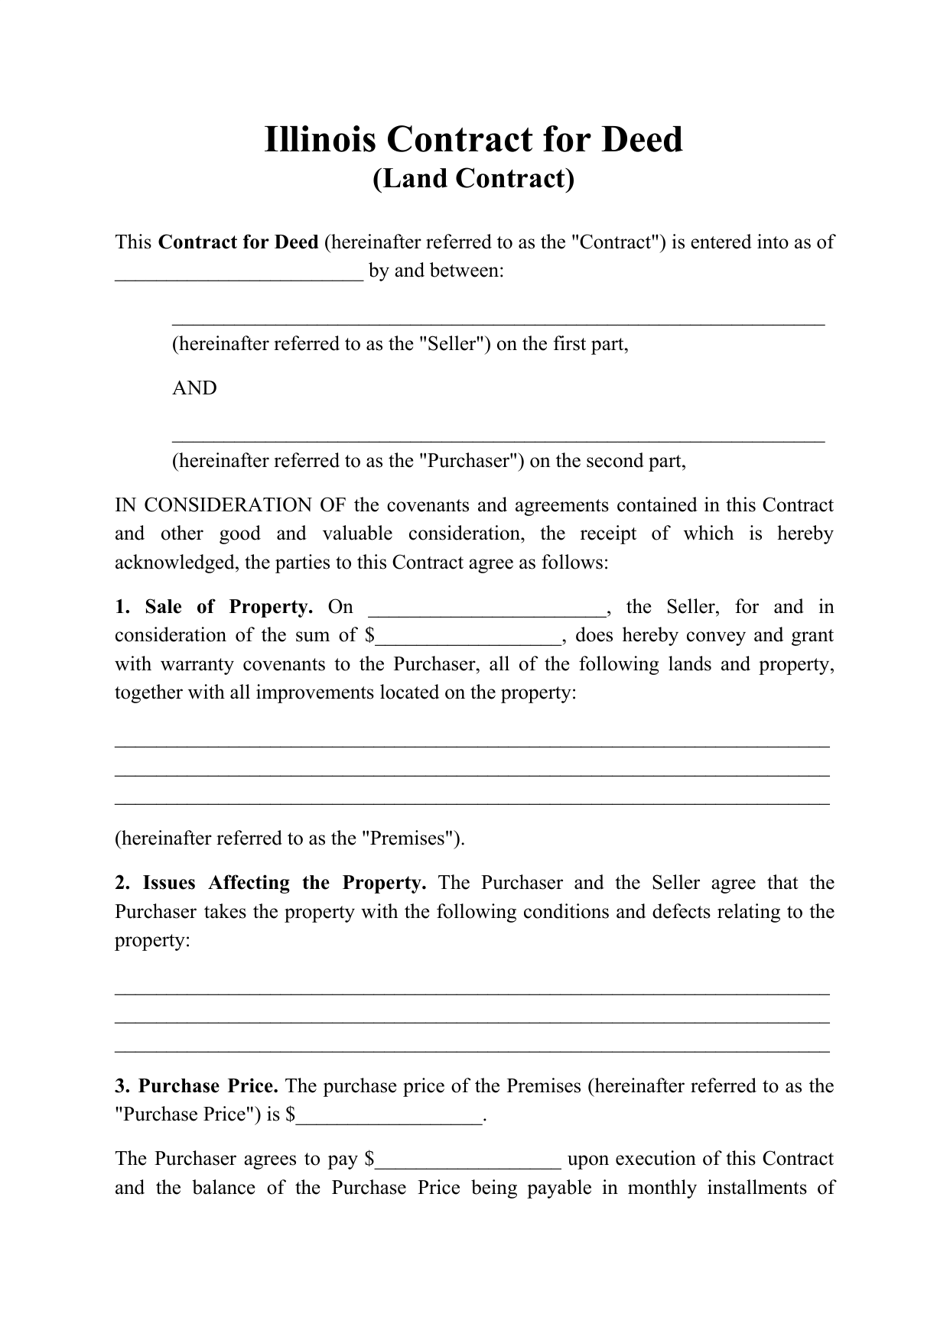 Contract for Deed (Land Contract) - Illinois, Page 1